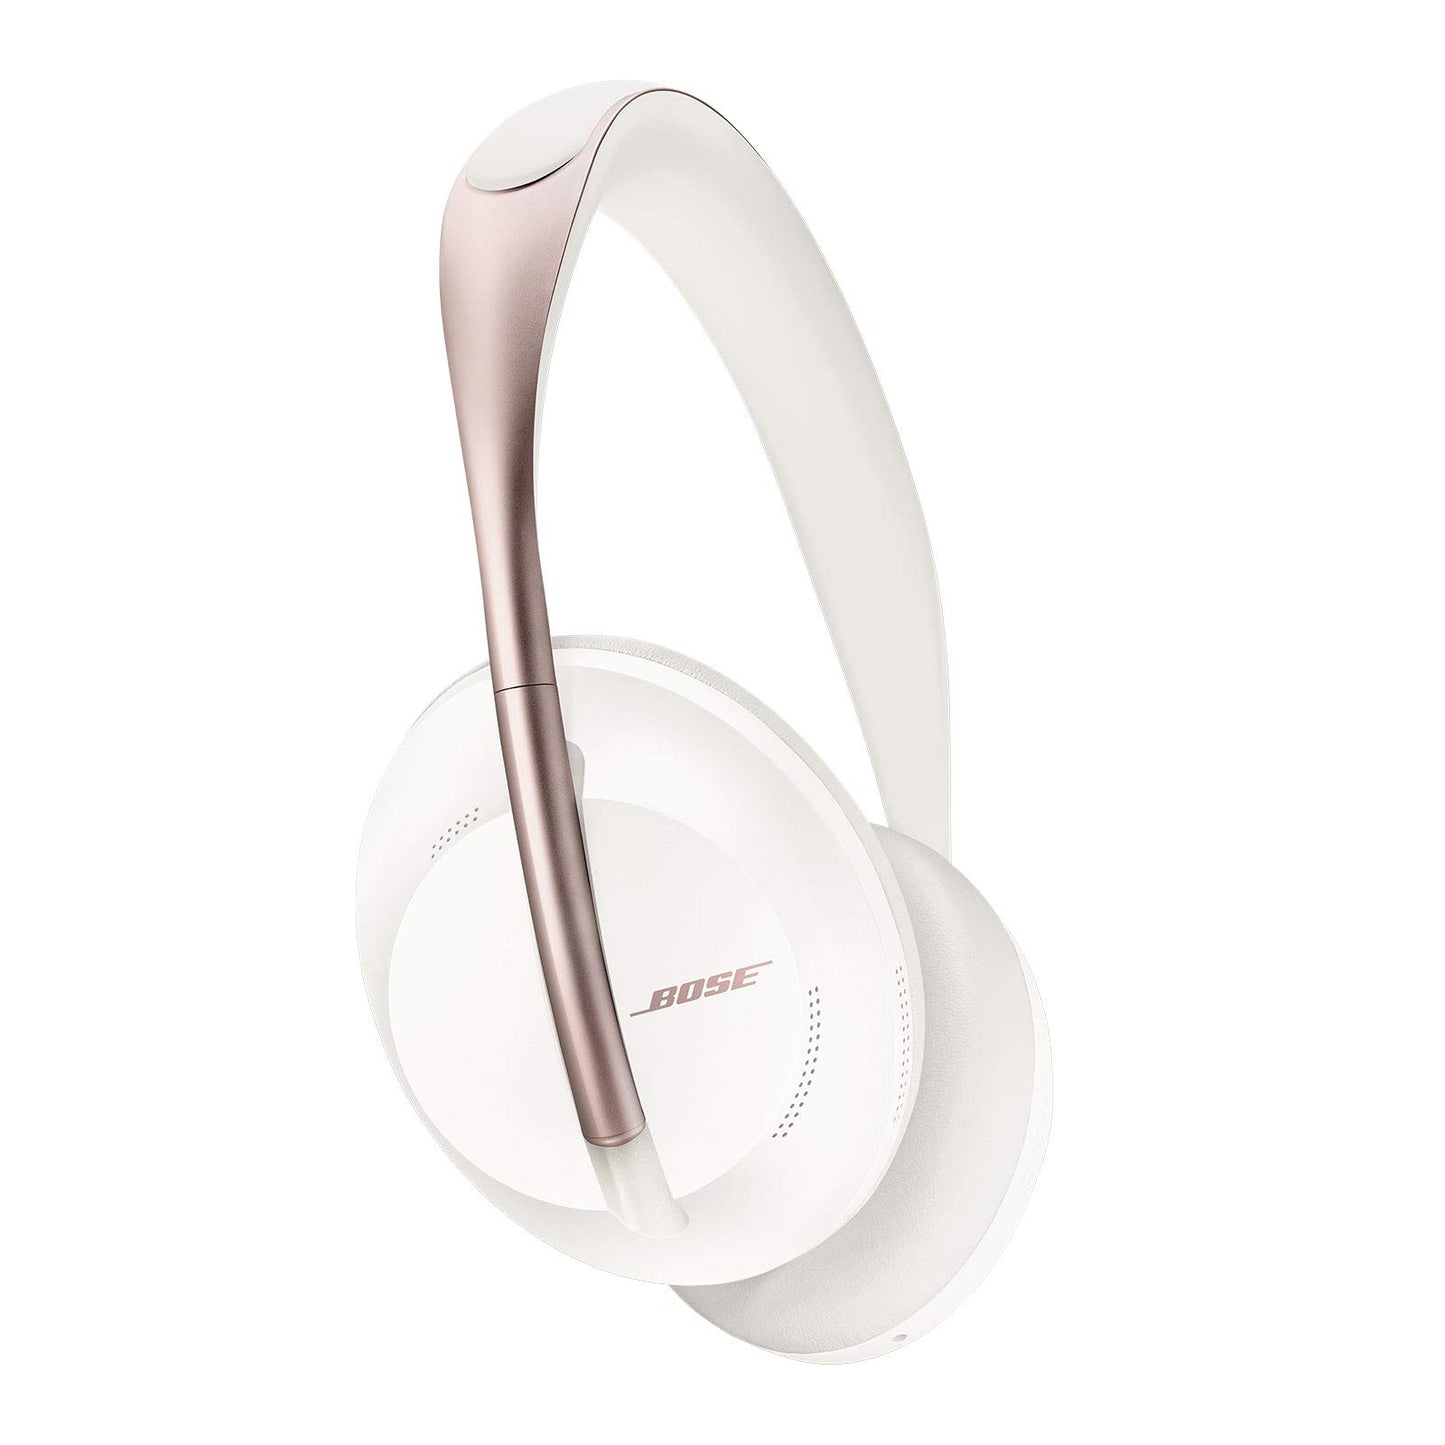 Bose NCH 700 - Noise Cancelling Headphones